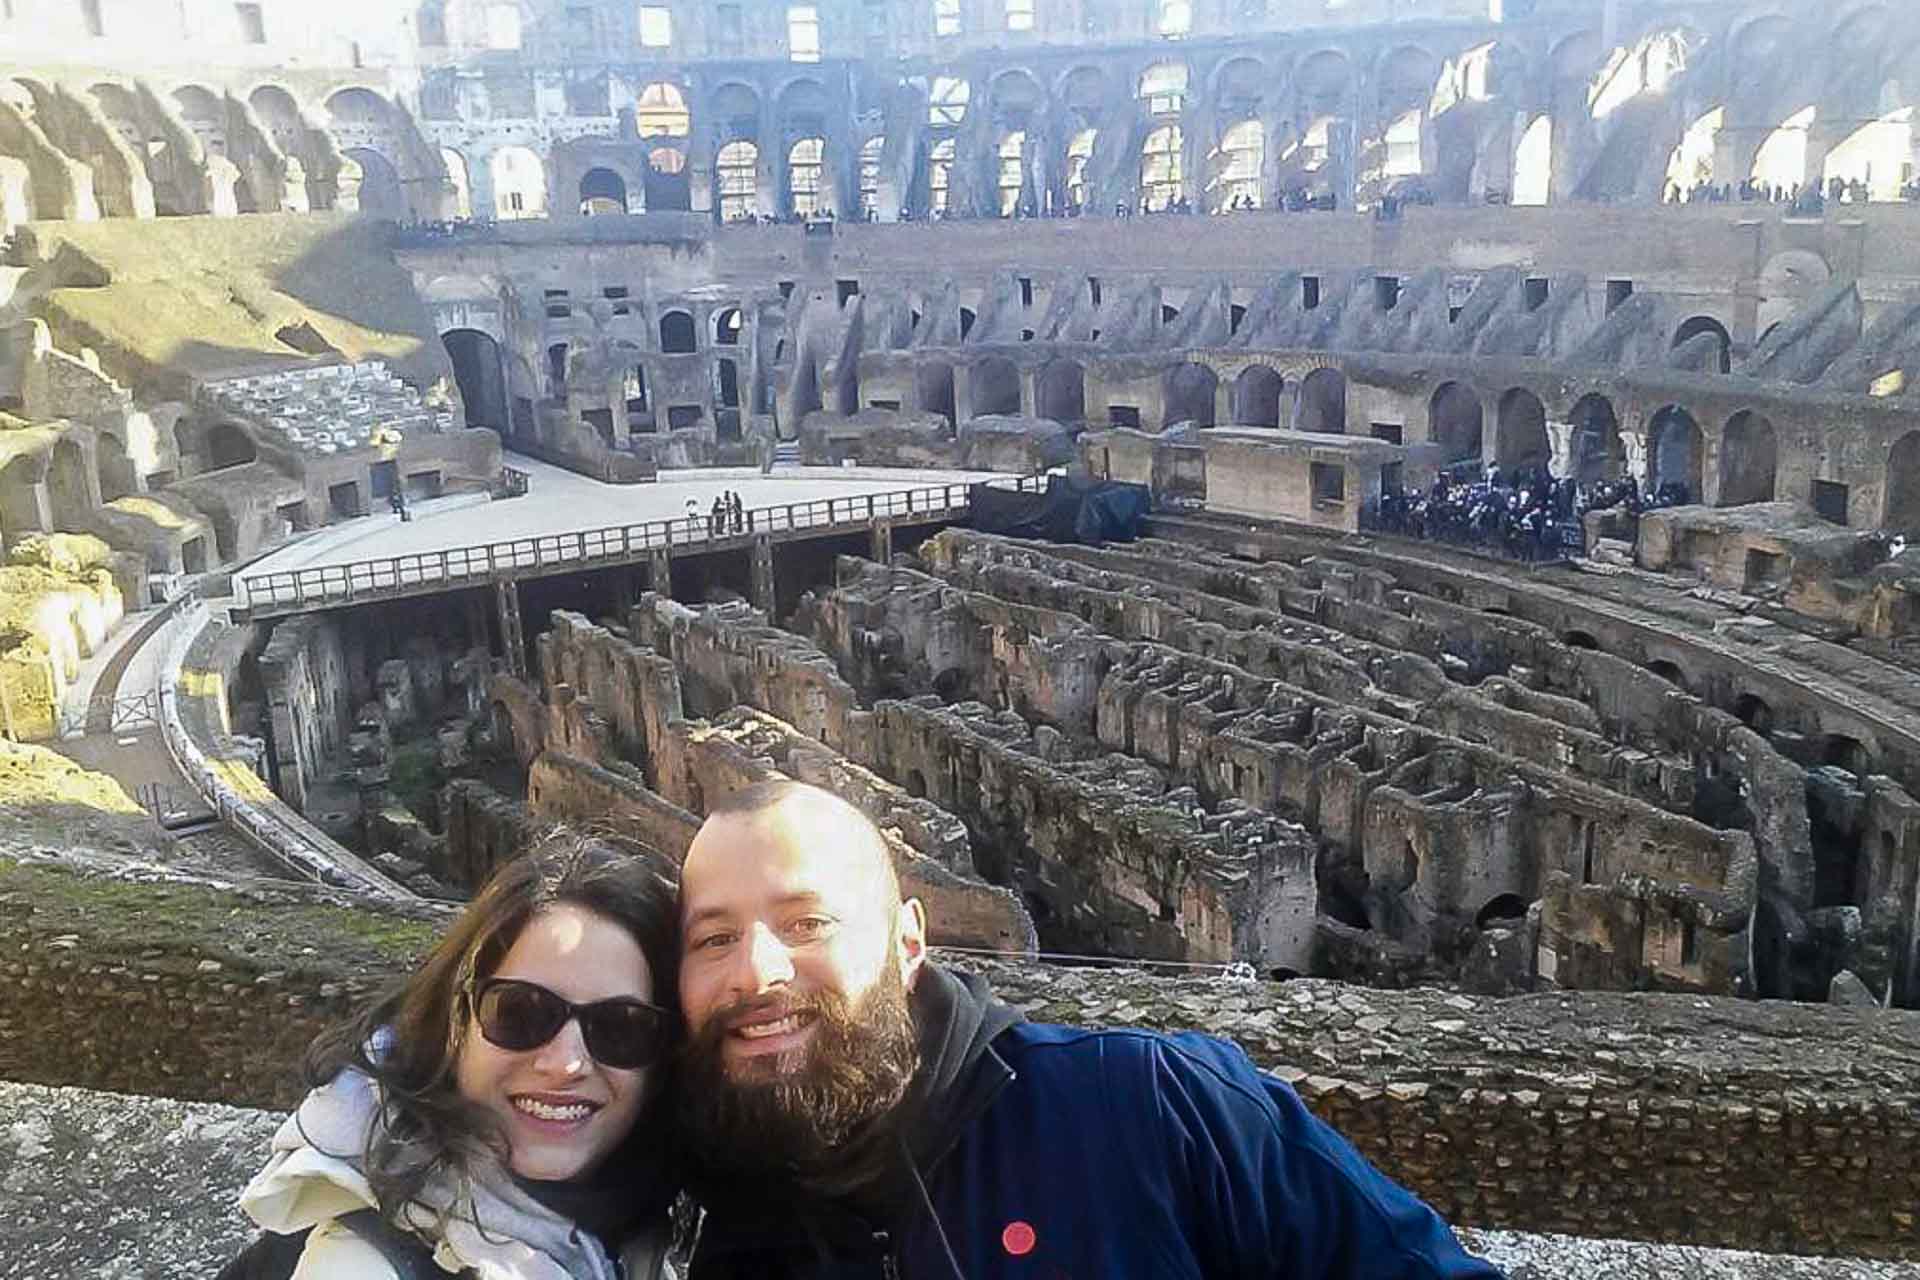 Tiago and Fernanda inside the Colosseum in Rome Italy